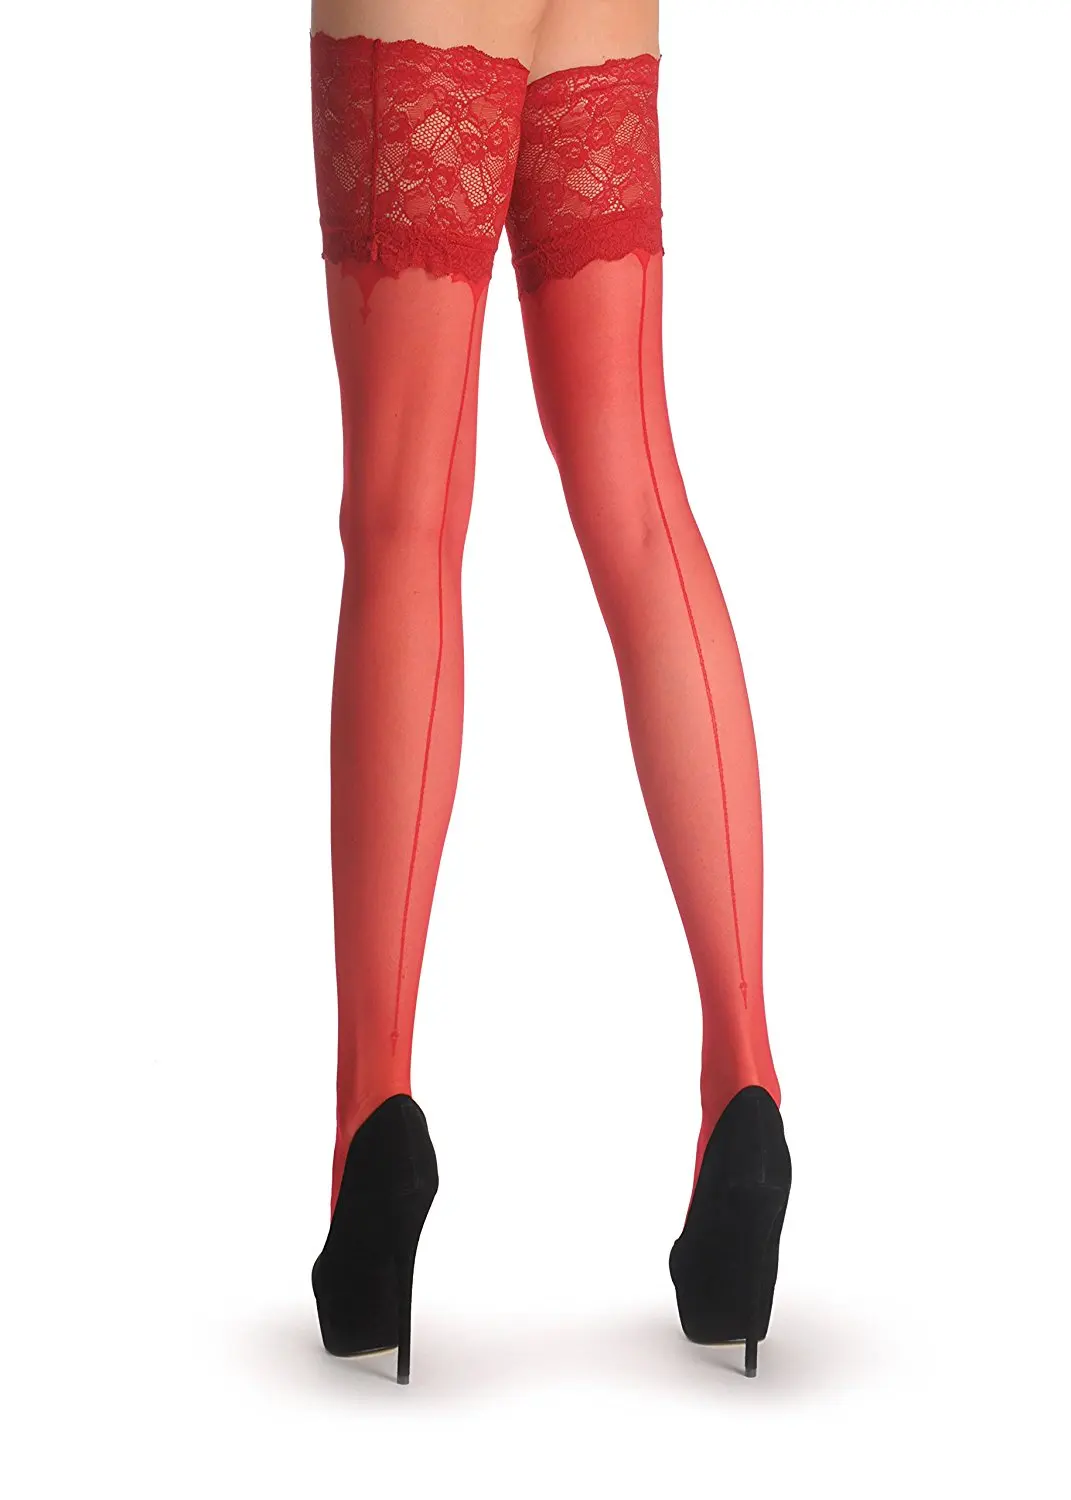 Buy Red Back Seam And Red Lace Silicon Garter Stay Up Thigh High Hold